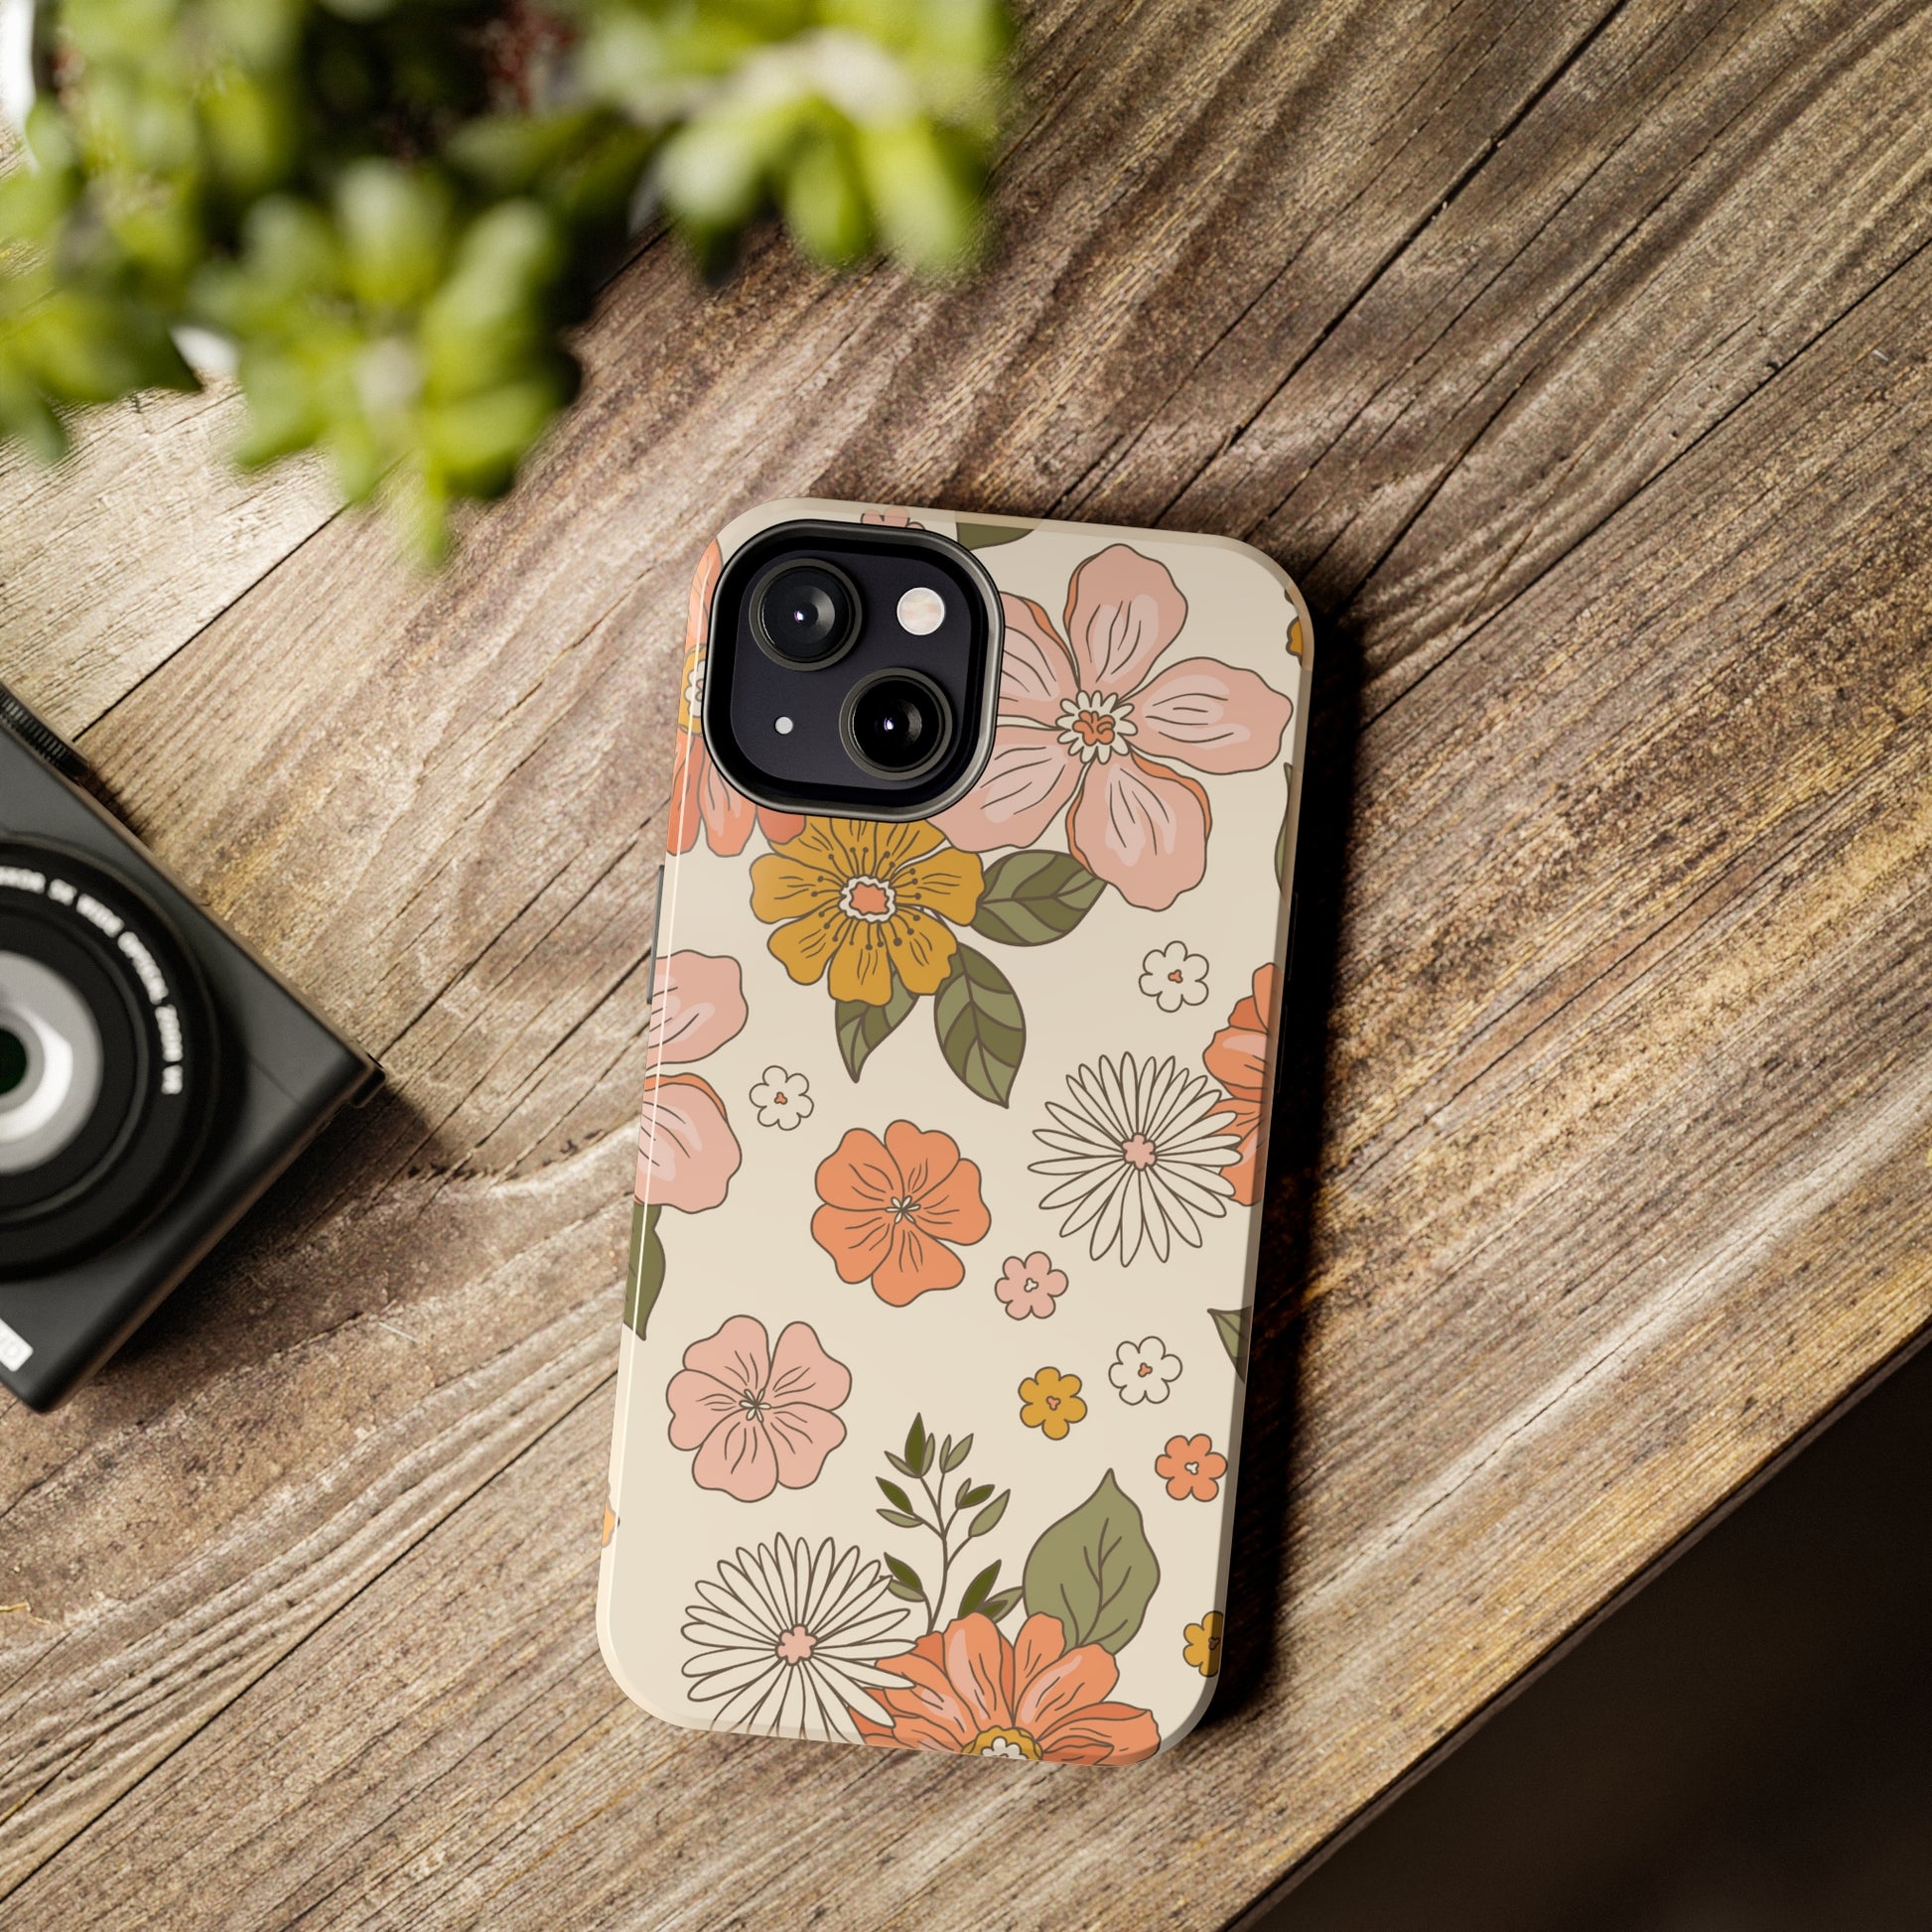 floral phone case with colorful but muted colors